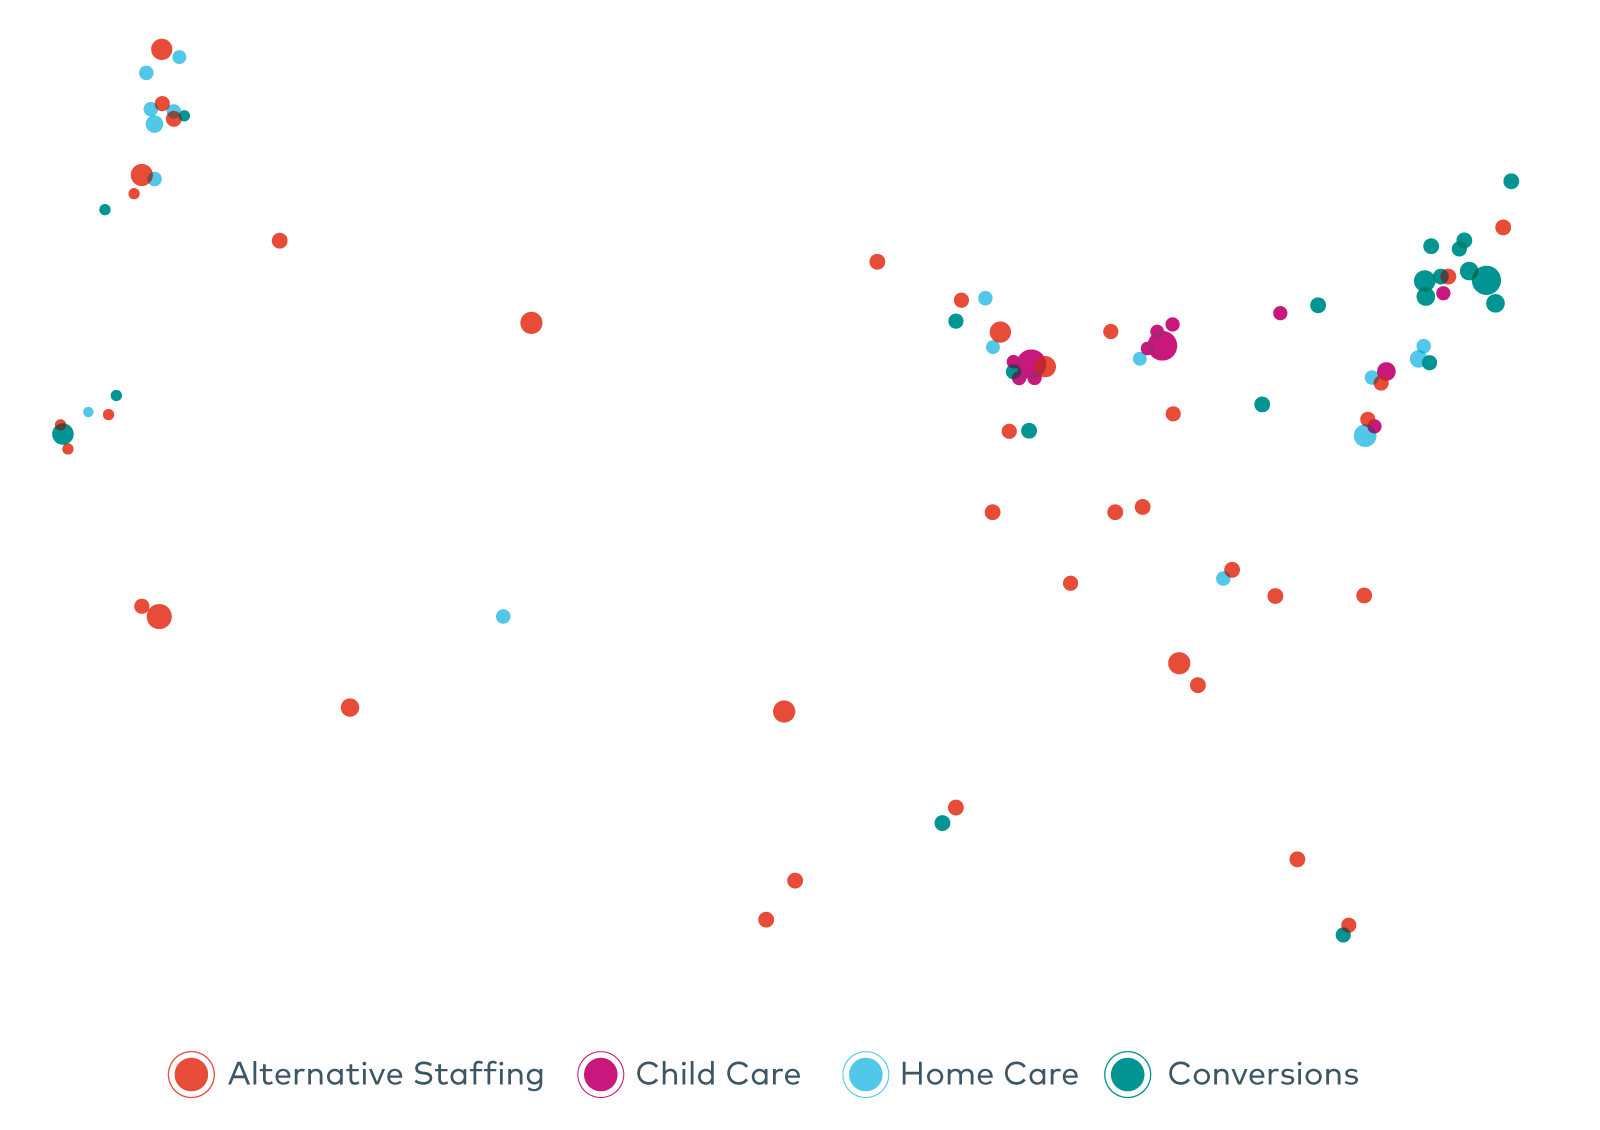 A map of the united states, showing dots for alternative staffing, child care, home care, and conversions.